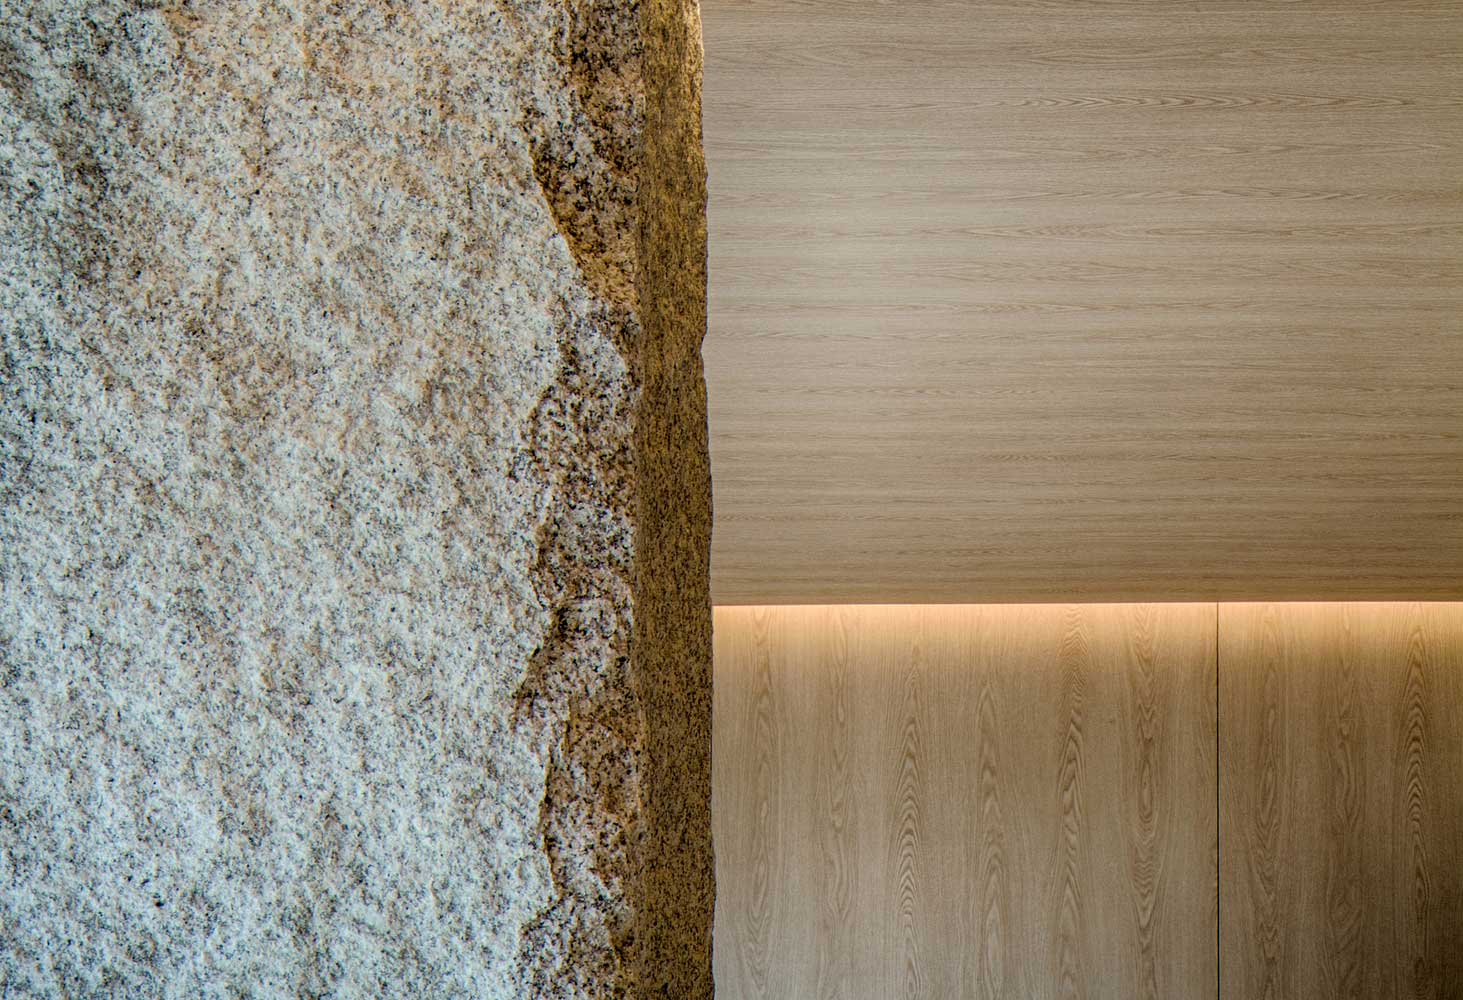 A stone pillar juts into the yoga studio offering structural support for the building and connecting the manmade with the natural